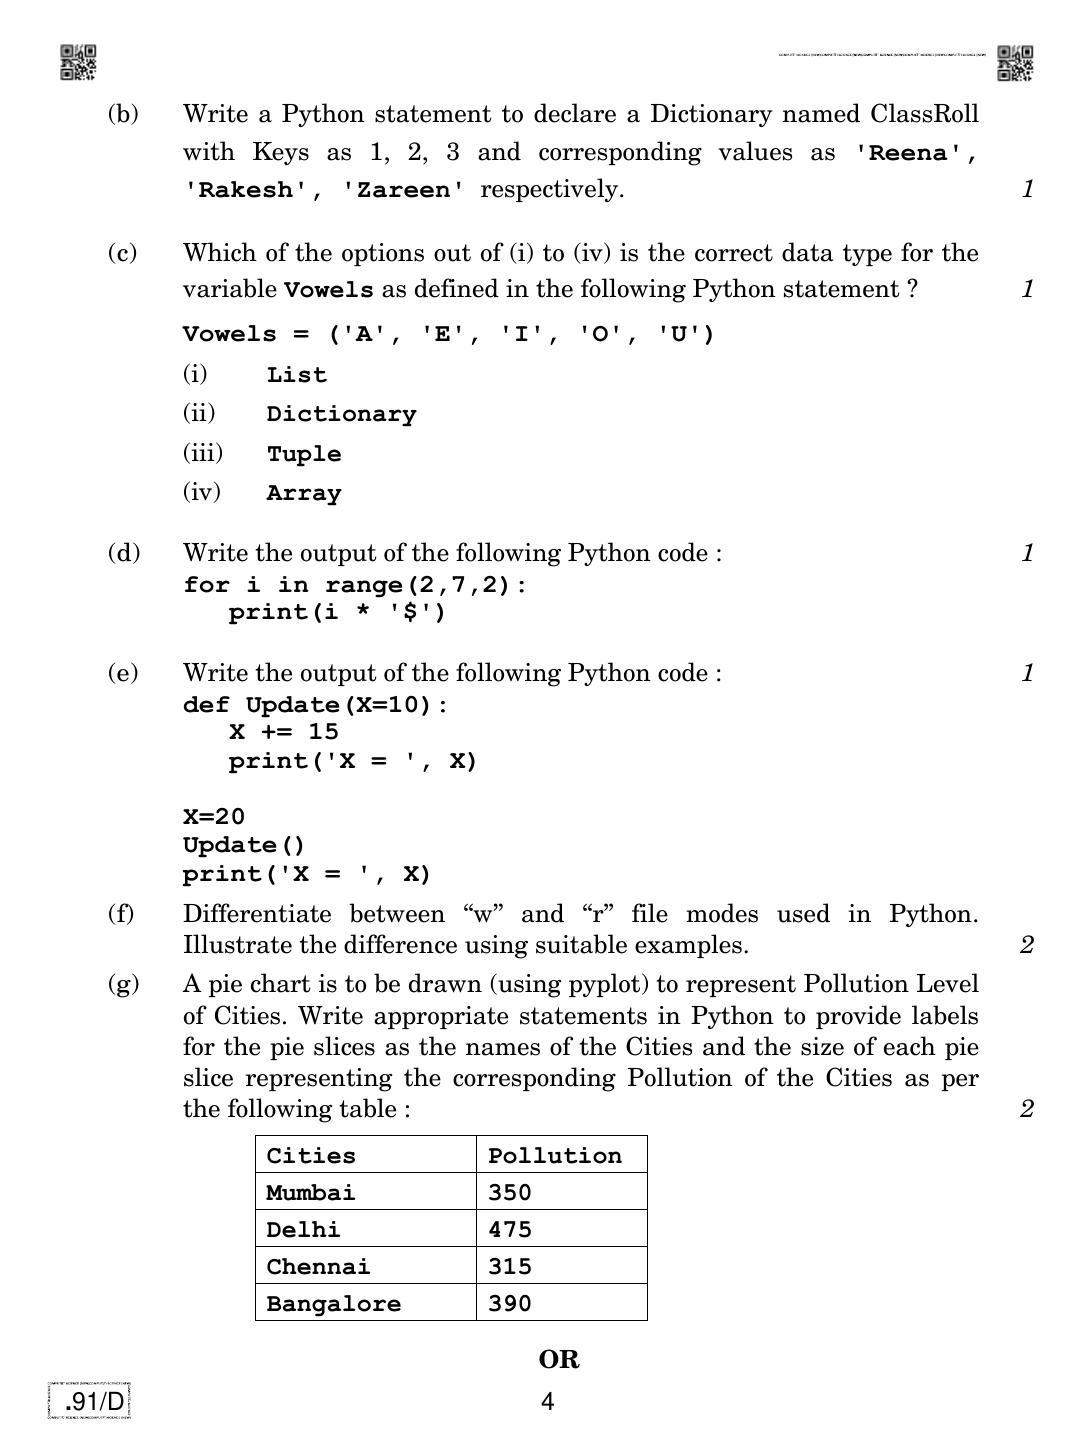 CBSE Class 12 CS 2020 Compartment Question Paper - Page 4